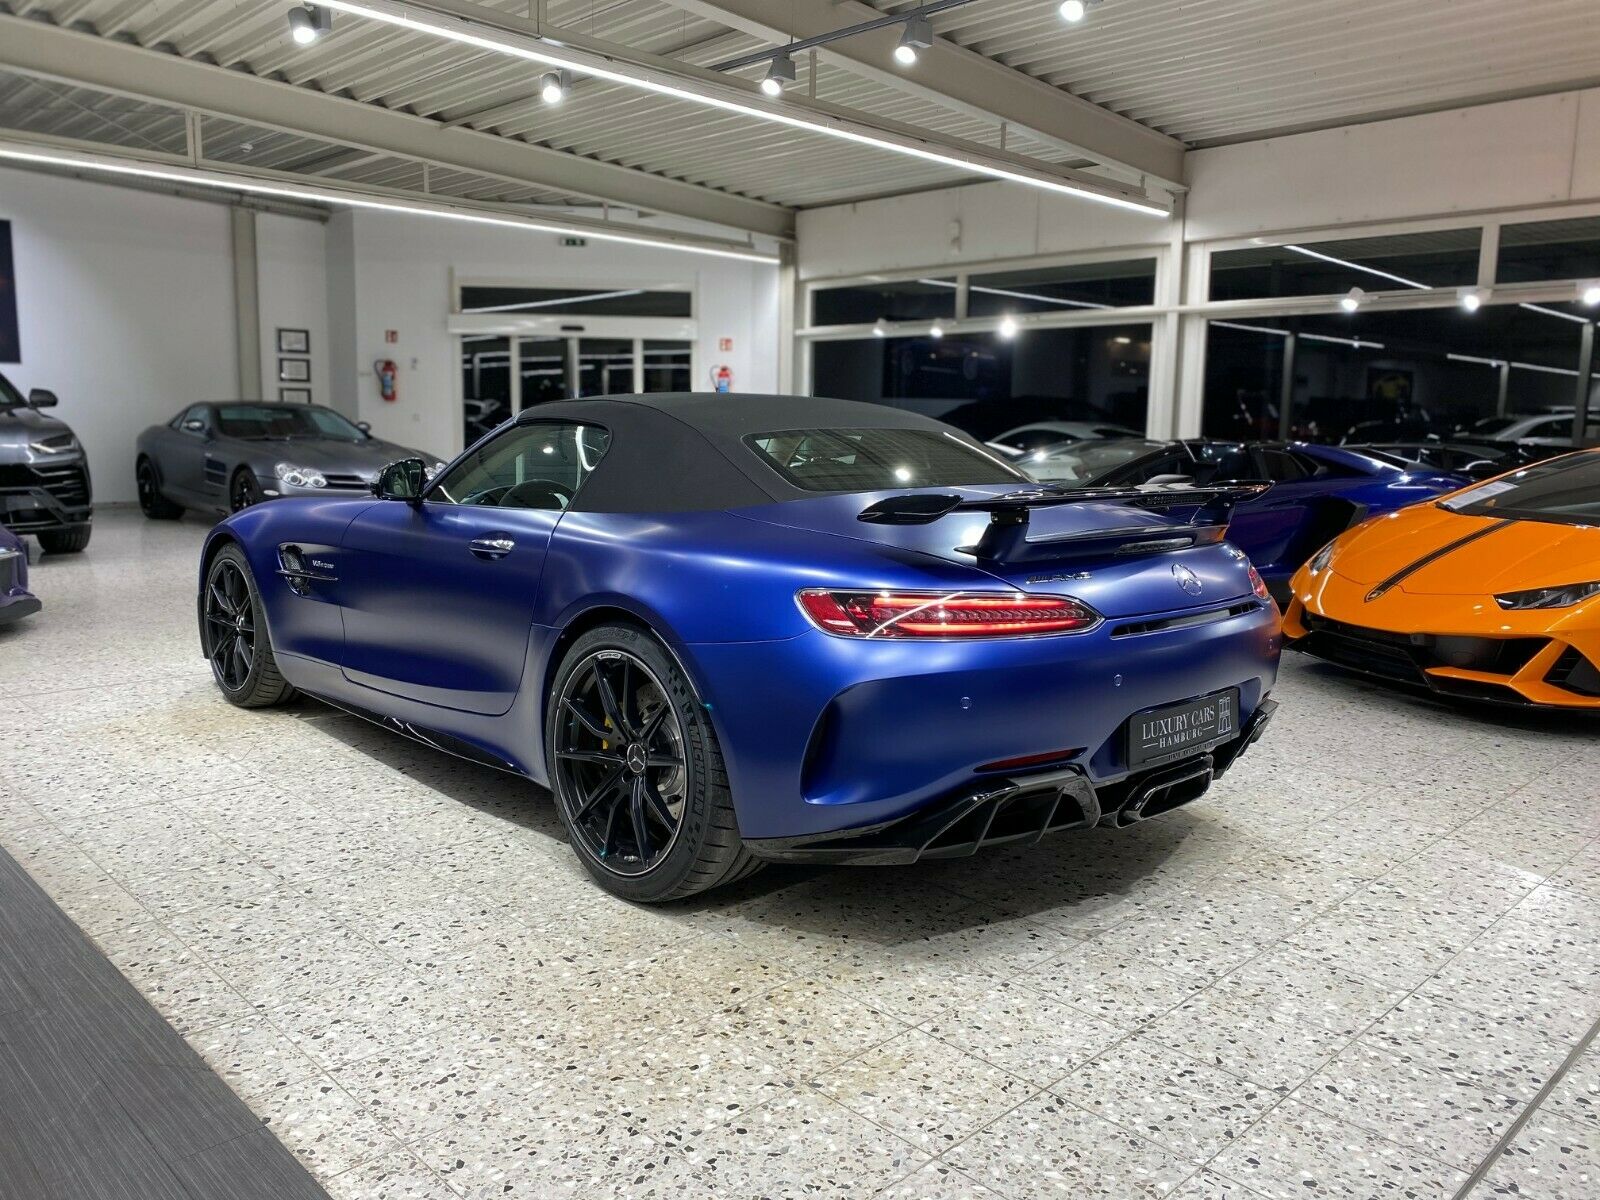 Mercedes Benz Amg Gt Roadster R 1 Of 750 Luxury Pulse Cars